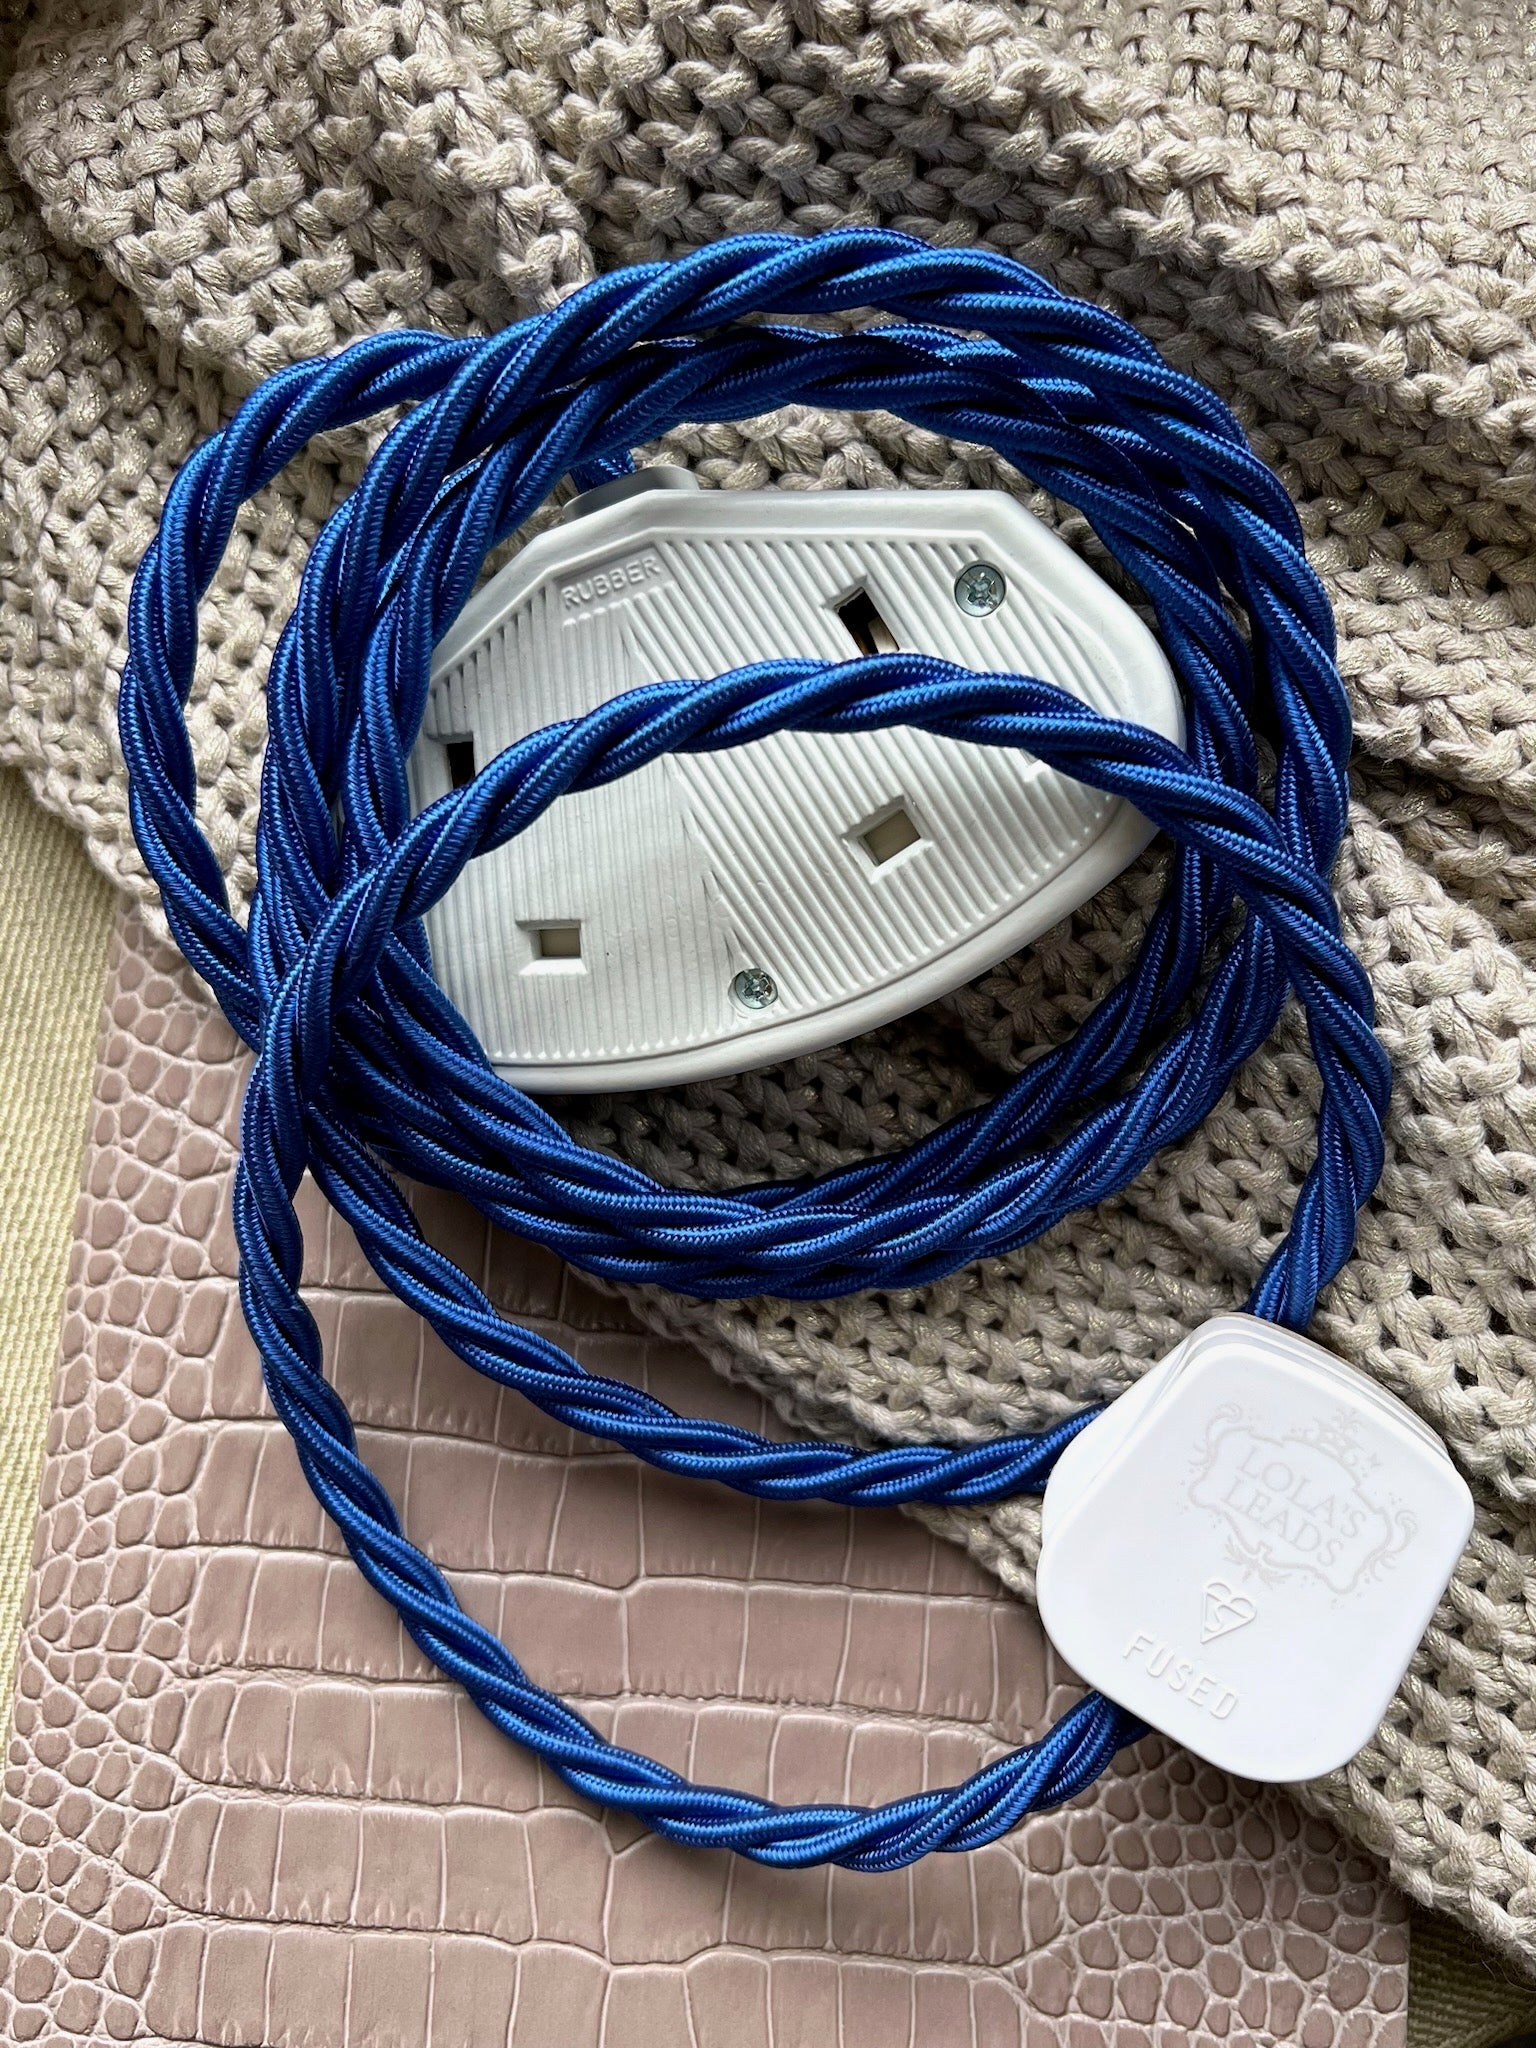 Cobalt + White - Lola's Leads Fabric Extension Cable